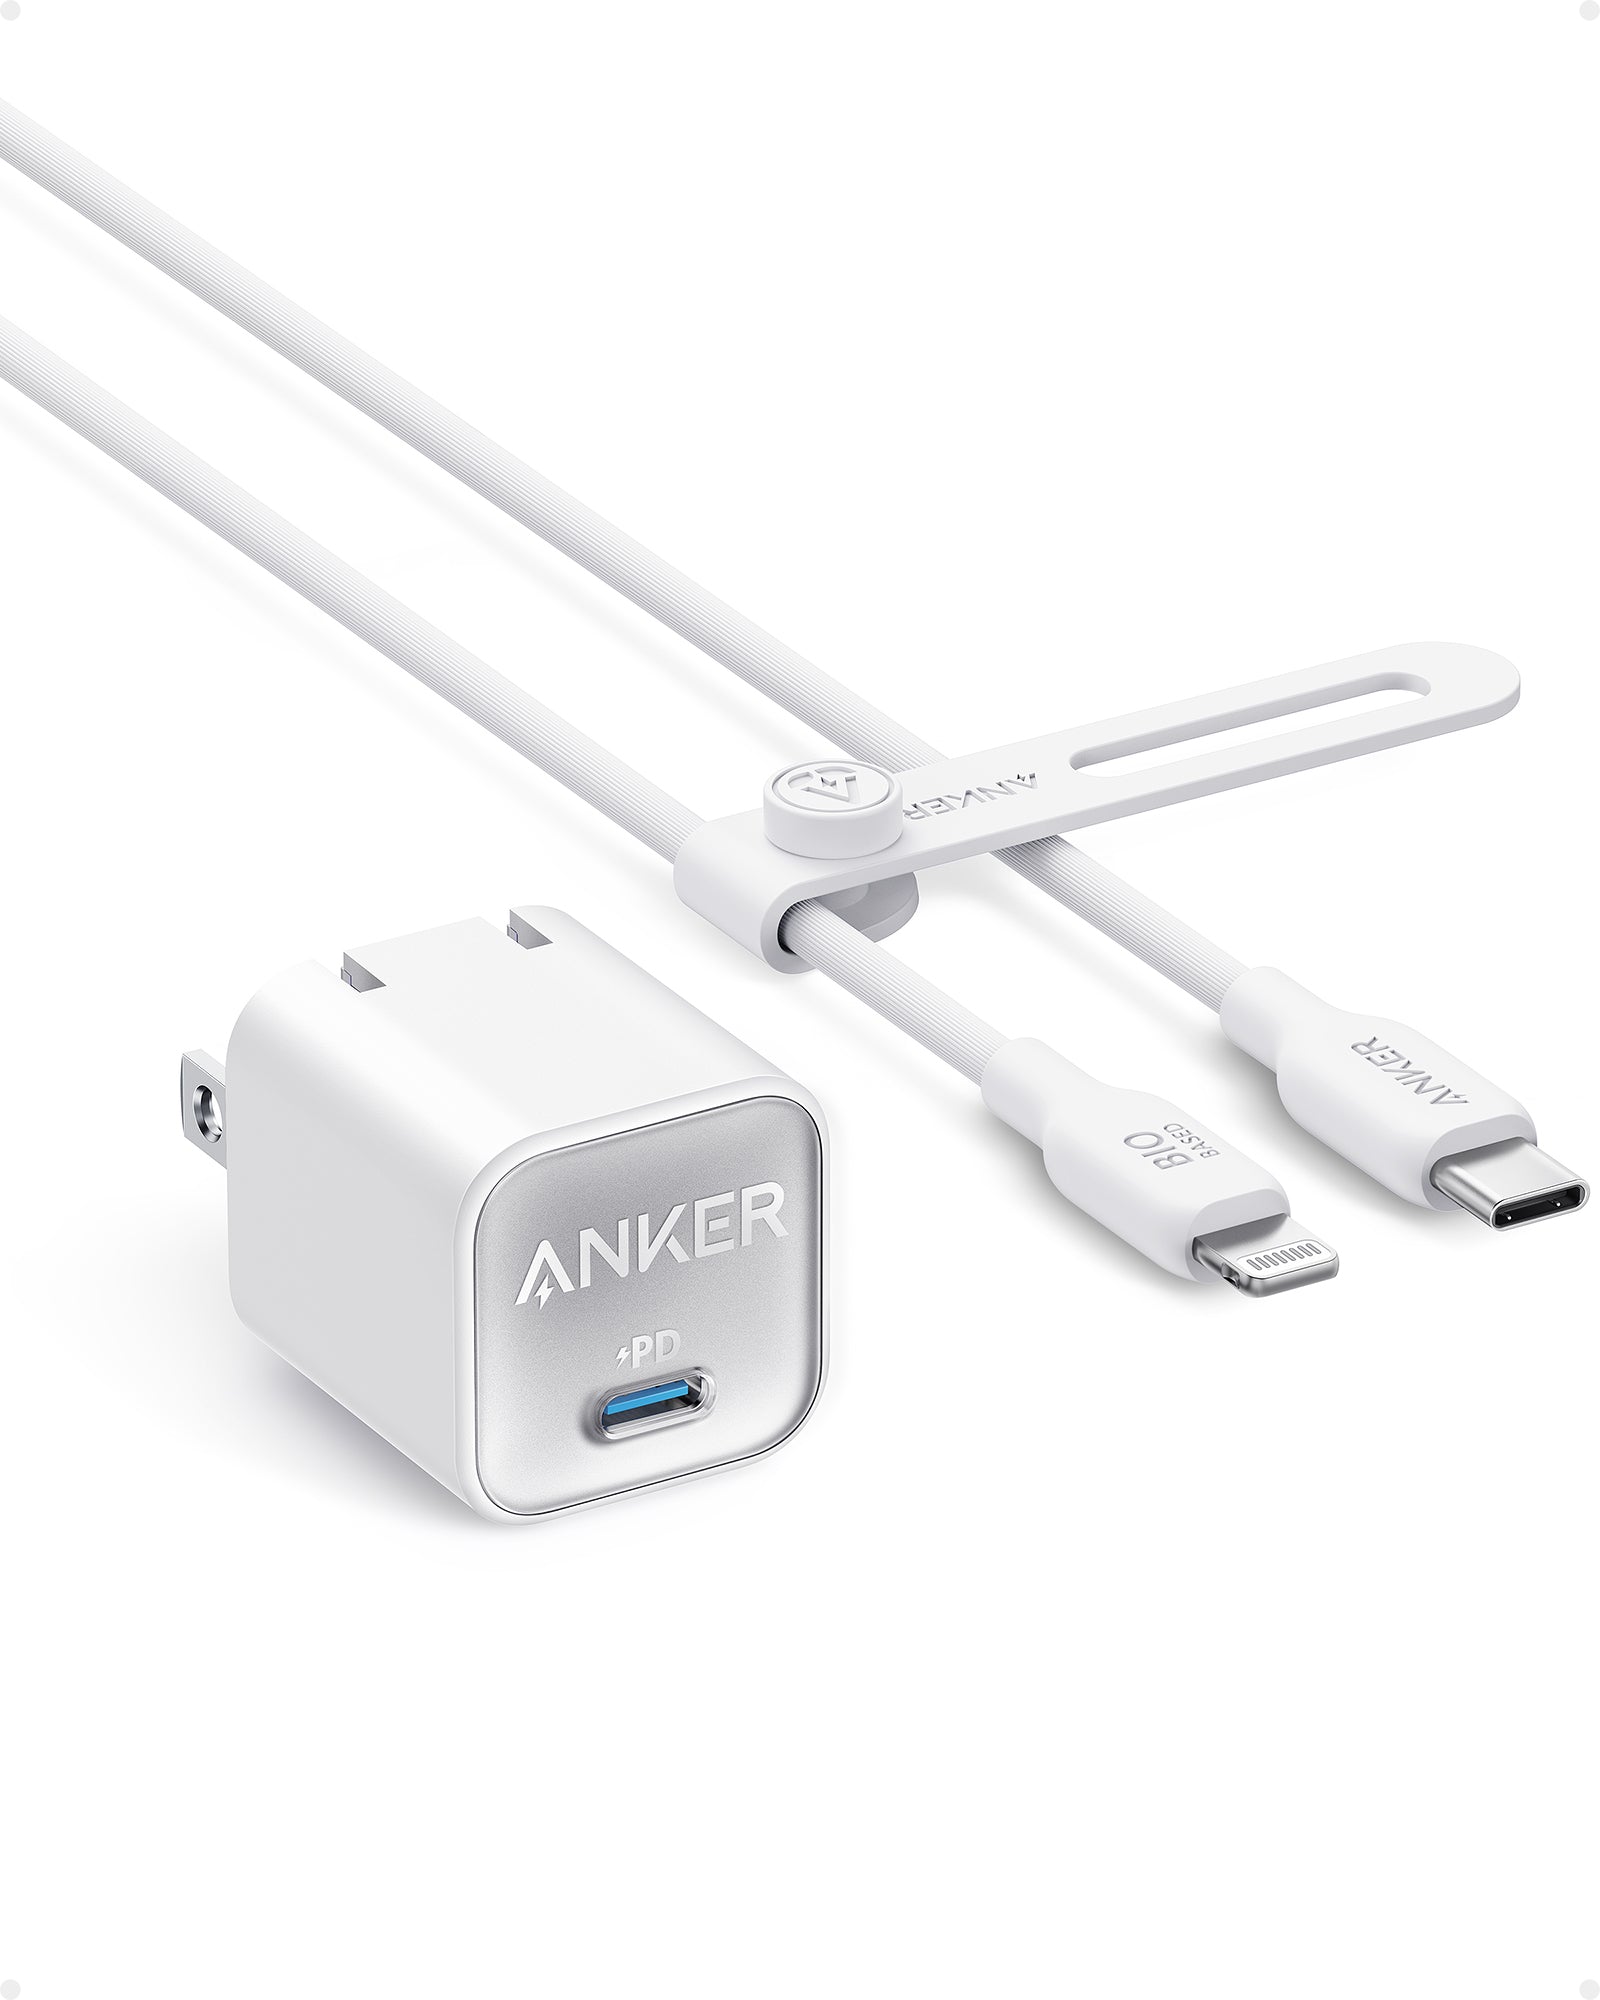 Anker <b>511</b> Charger (Nano 3, 30W) with 6 ft USB-C to Lightning Cable